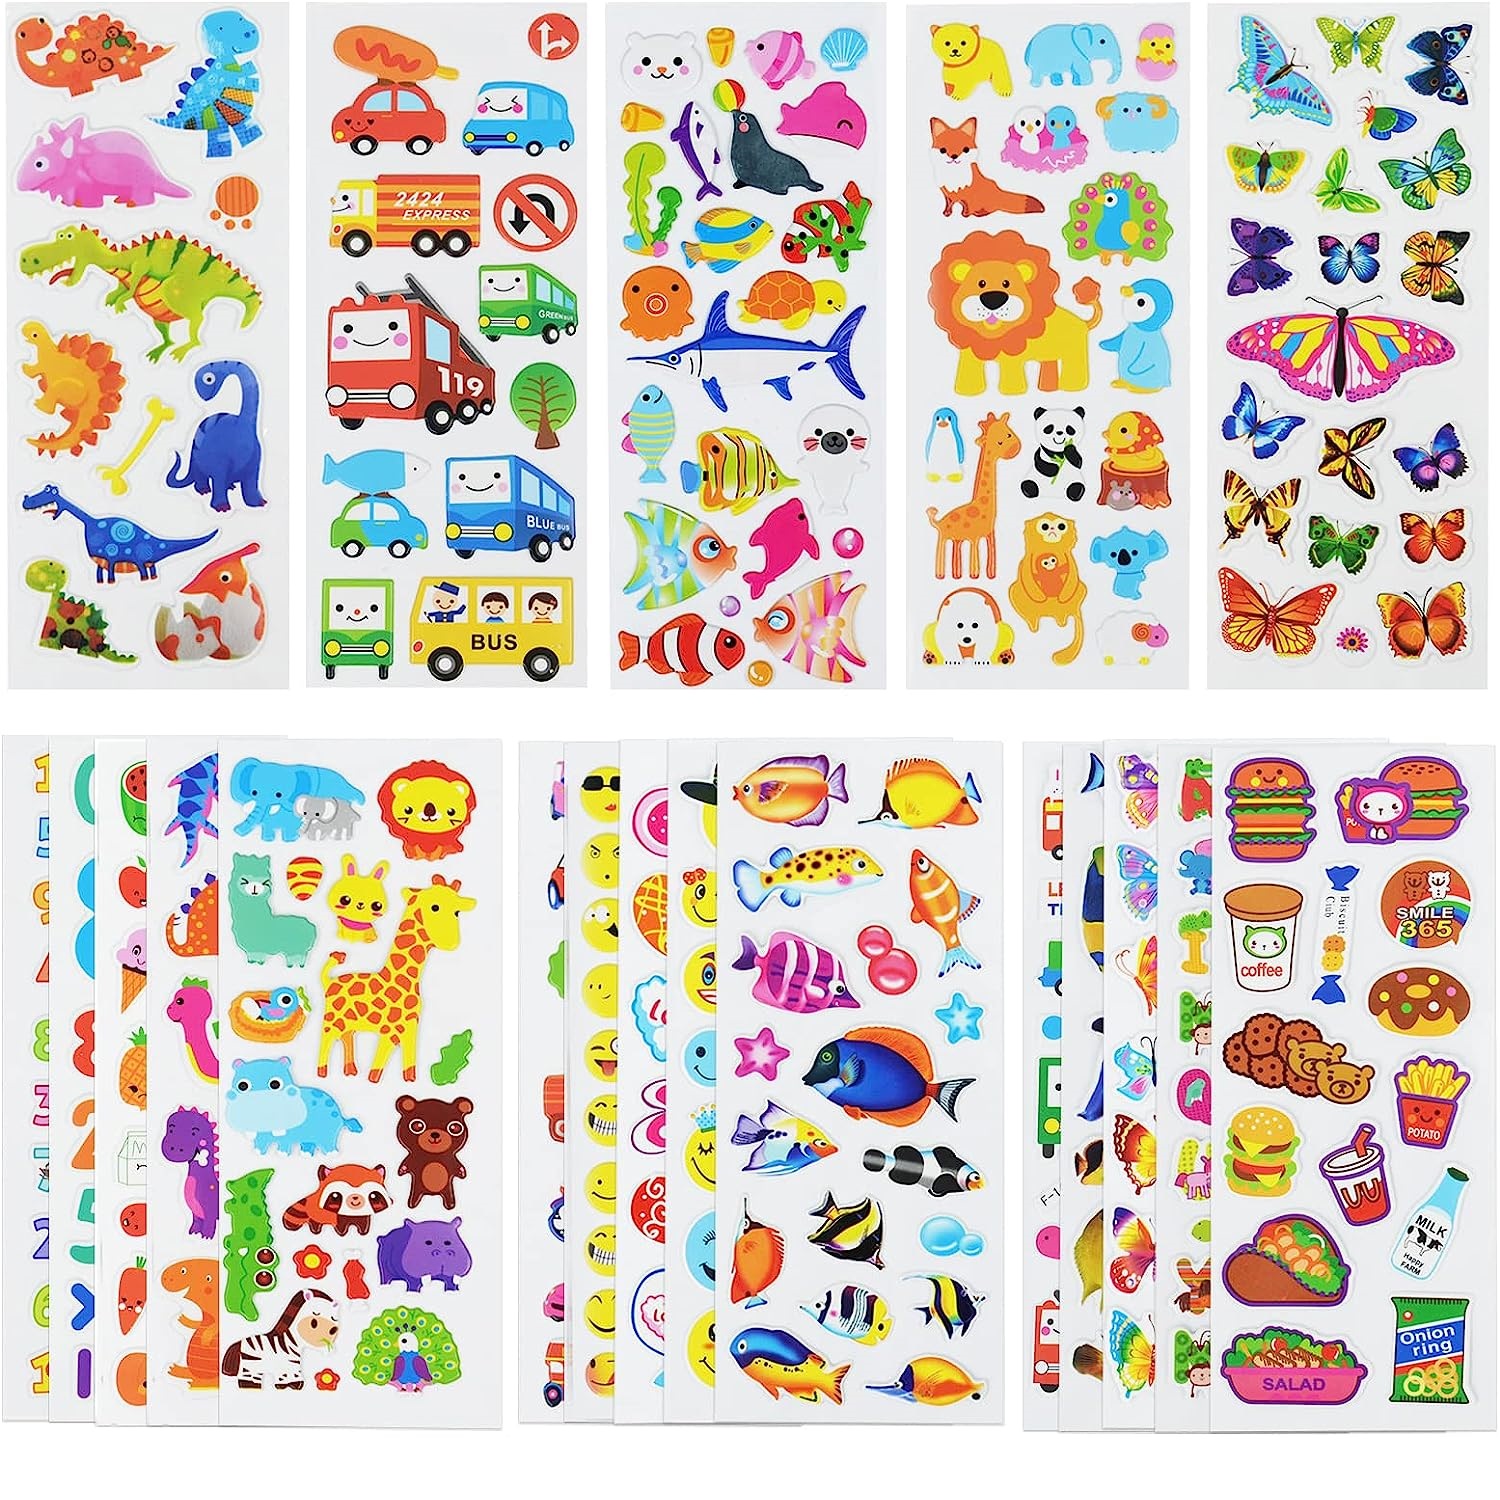 4pcs Kids Puffy Stickers 3D Bubbles Cartoon Stickers Decorative Sticker for Kids Children Toddlers (Assorted Color)